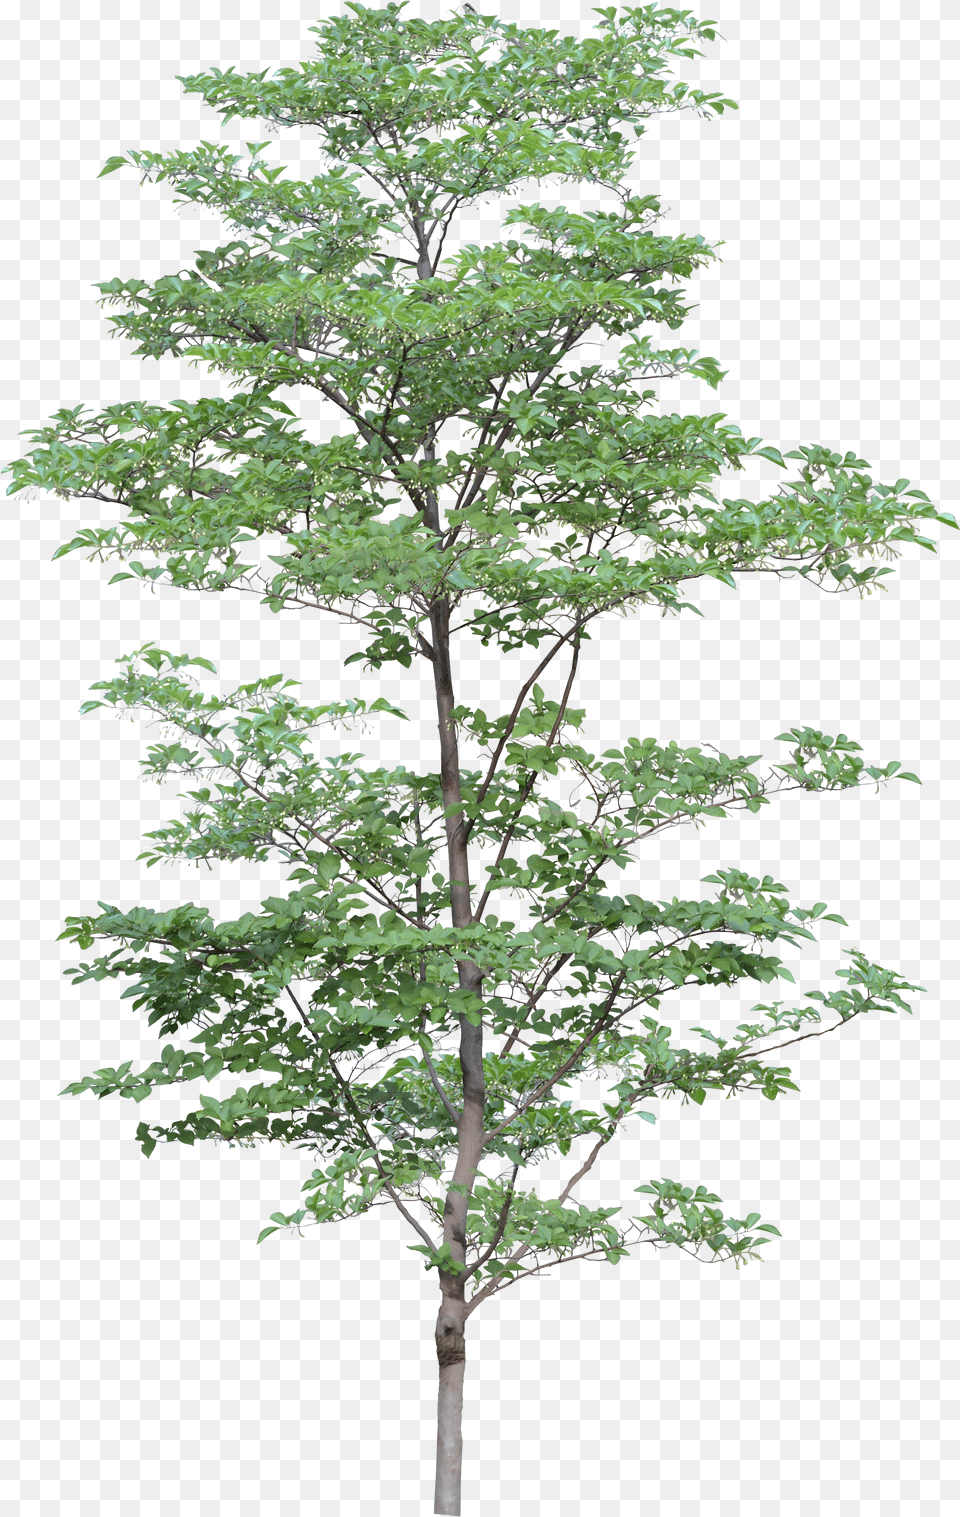 Tree, Plant, Potted Plant, Tree Trunk, Leaf Png